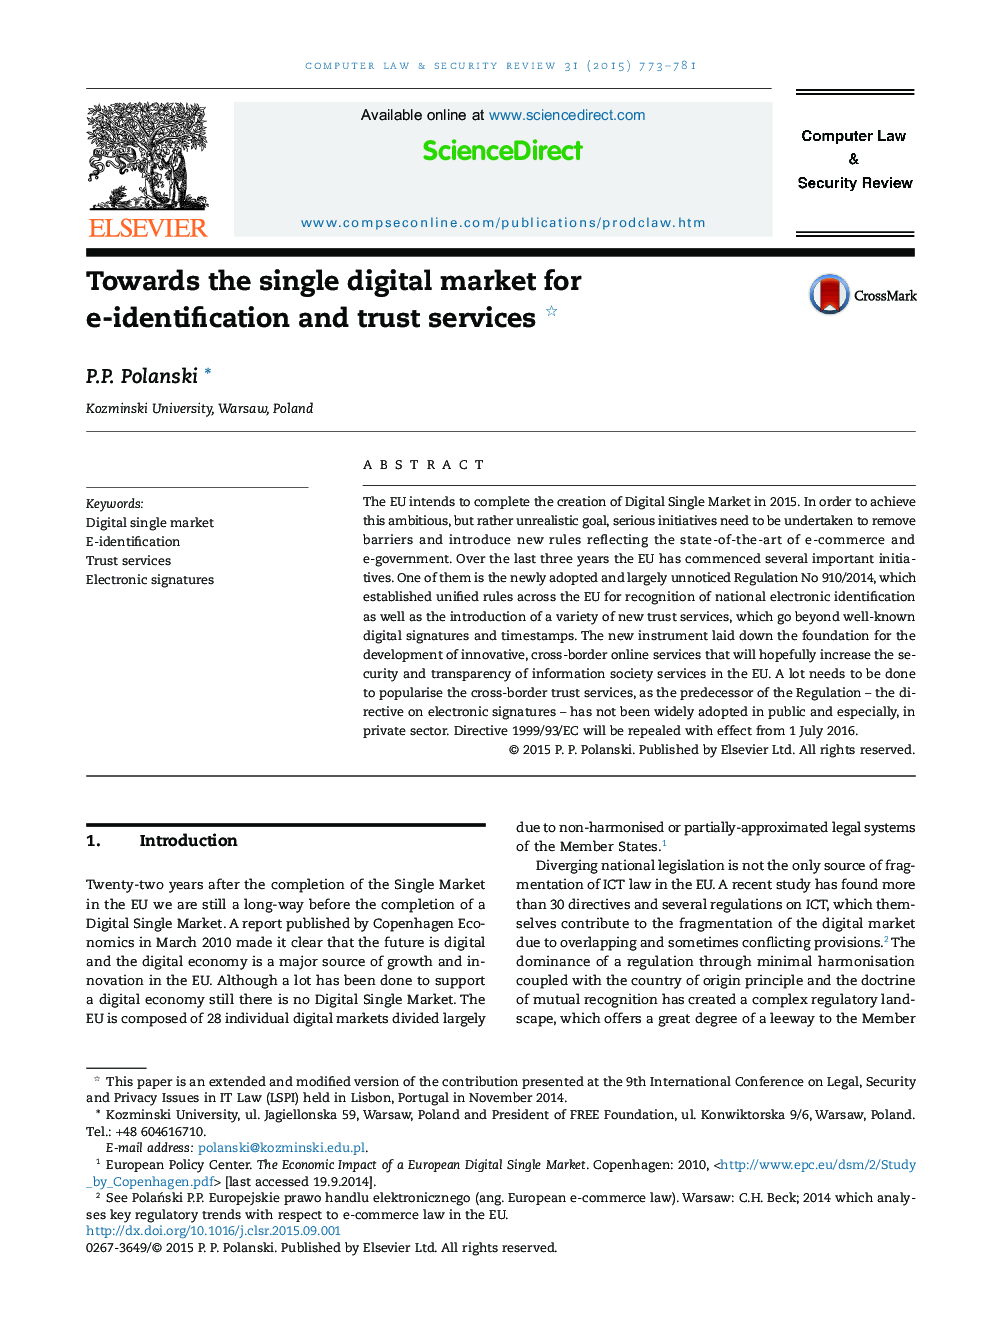 Towards the single digital market for e-identification and trust services 